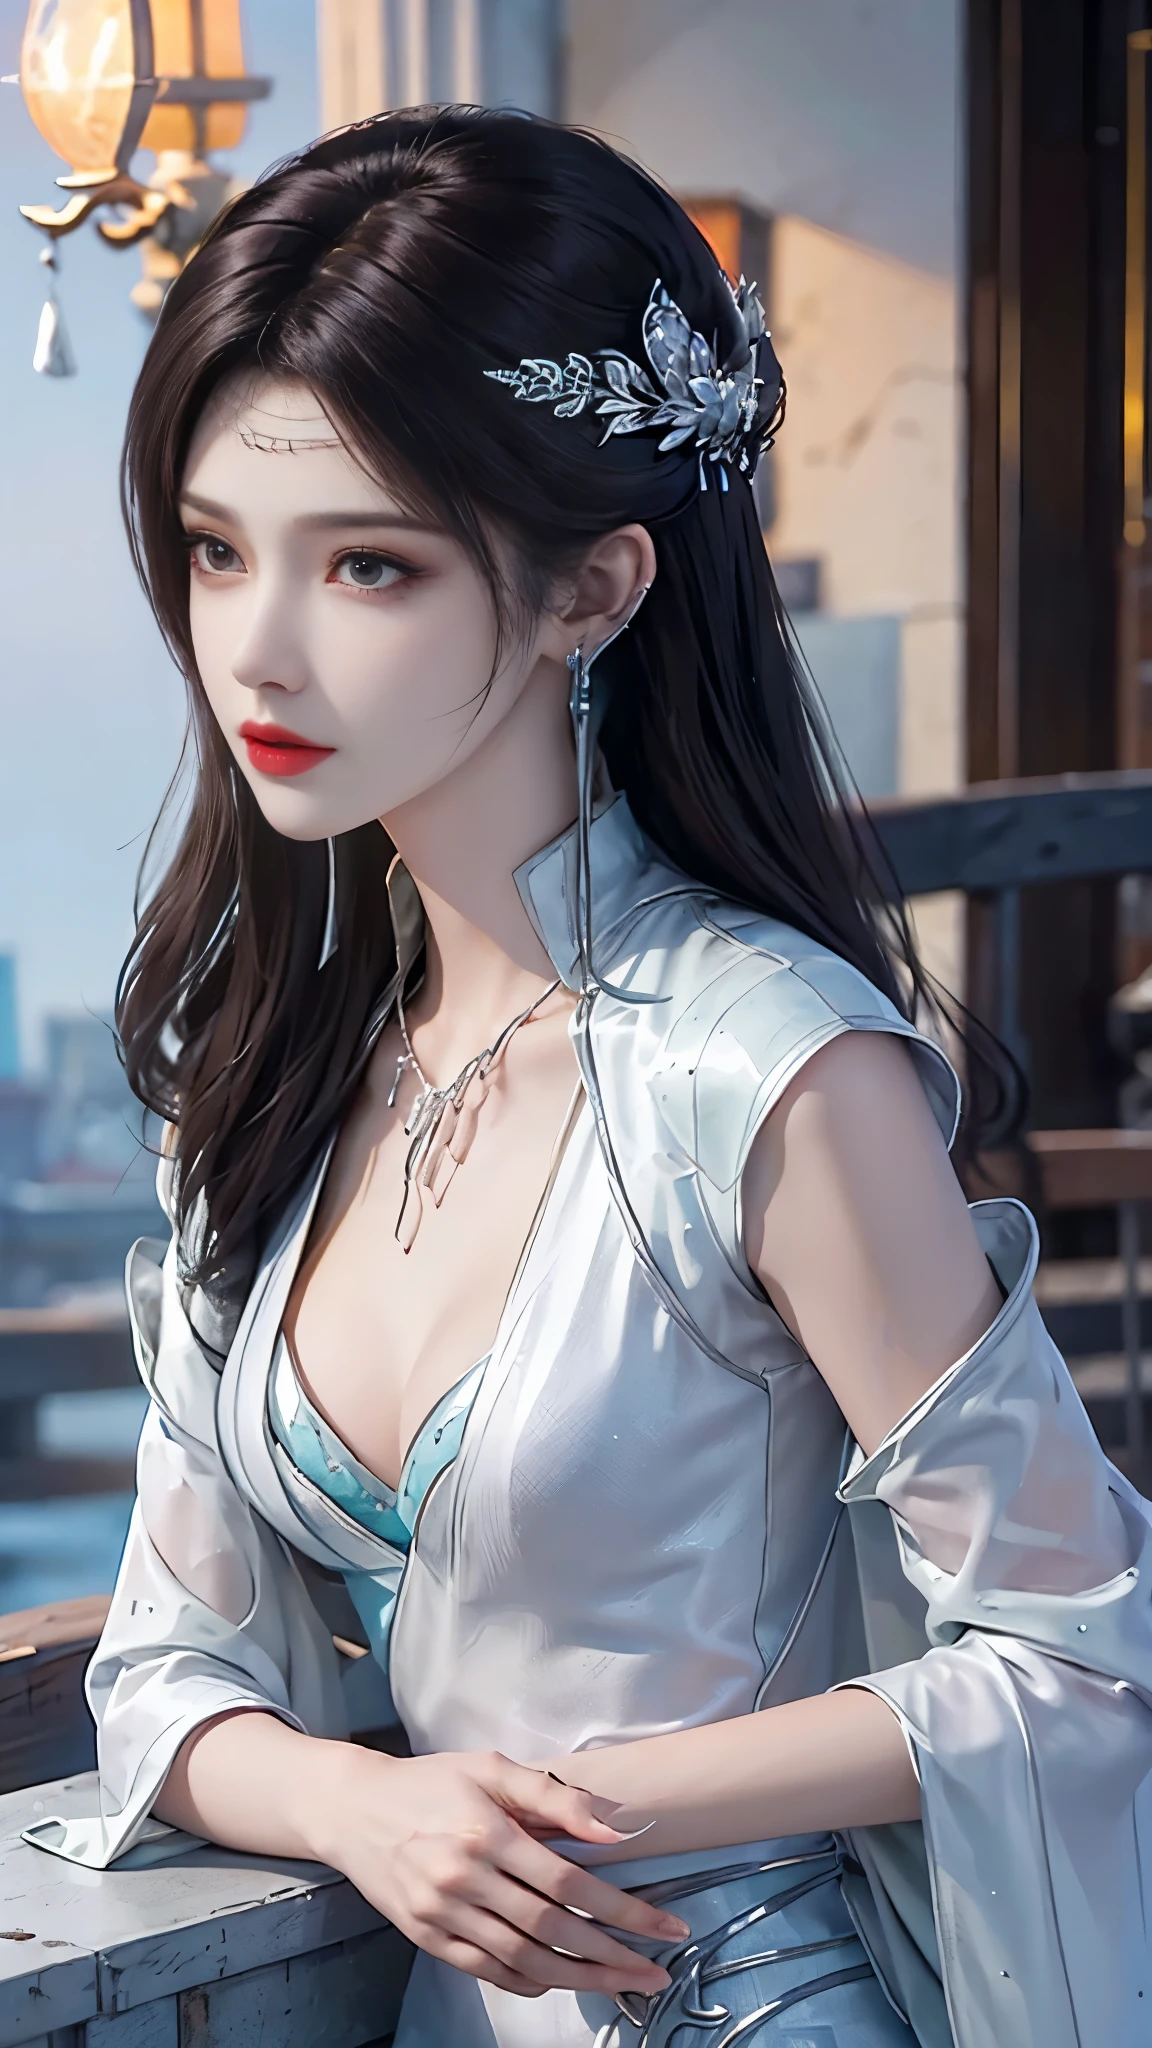 ((whole body)), ((from below)), Yushuxin,1 girl,alone, ((stand up, leaning on ledge)), ((lean forward)), ((The features are clear, clear face, clear face)), red lips, cosmetics, close-up, elegant pose, seductive pose, Perfect Curve, Slim, sexly, big breasts, split, beautiful legs, charming gaze, bite lip, messy long hair, Simple and casual scene, Very detailed, Ultra-clear, best quality, official art, exquisite earrings, exquisite necklace, Very detailed description, Super beautiful painting, Sophisticated functionality, elegant, beautiful, Super fine details, masterpiece, Authentic texture, Realistic movie lighting, masterpiece, best quality